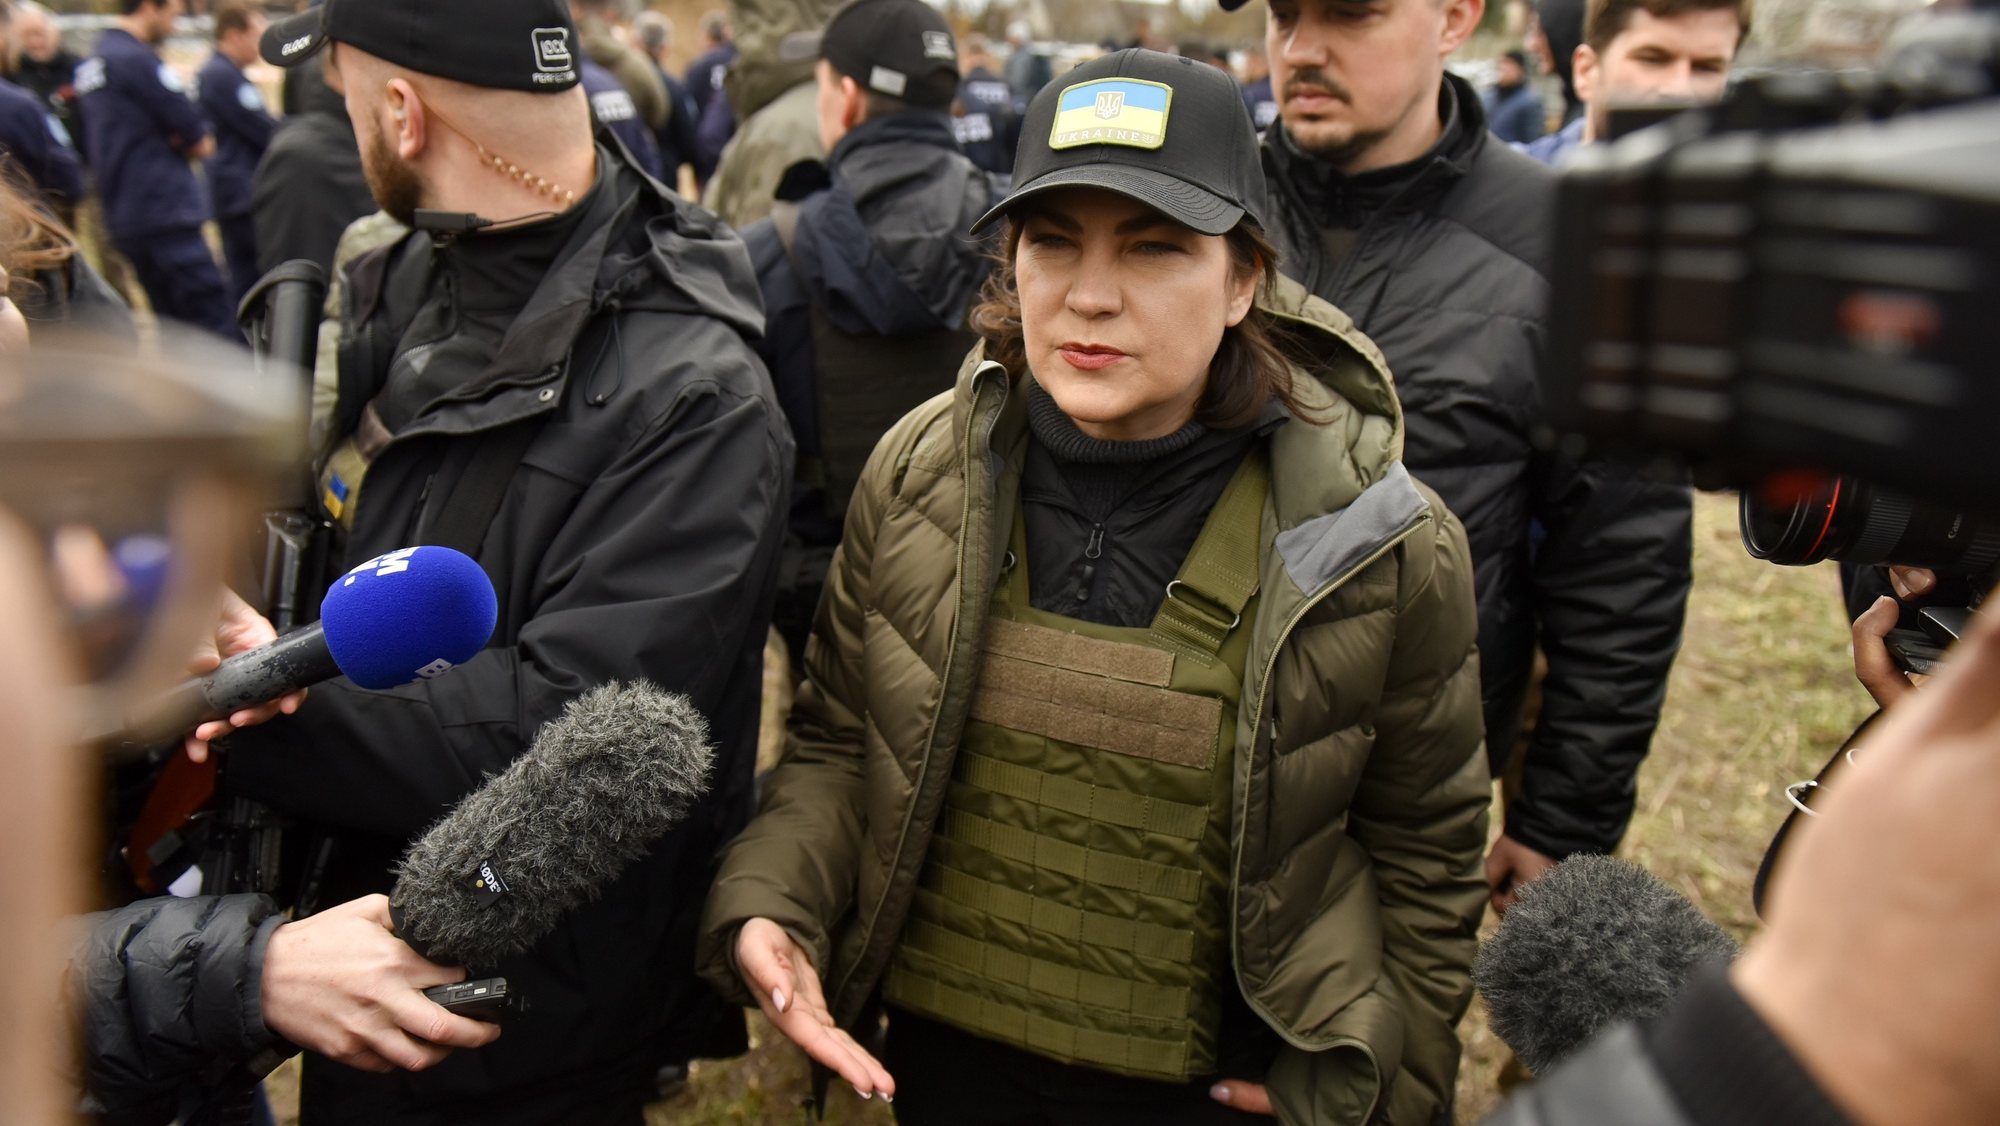 epa09885929 Prosecutor General of Ukraine Iryna Venediktova speaks to journalists during a visit to a mass grave in Bucha, Kyiv (Kiev) area, Ukraine, 12 April 2022. Forensic investigators began exhuming a mass grave in Bucha containing more than 410 bodies of civilians, according to Ukrainian officials. The UN Human Rights Council has decided to launch an investigation into the violations committed after Russia&#039;s full-scale invasion of Ukraine, the Ukrainian Parliament reported. Russian troops entered Ukraine on 24 February resulting in fighting and destruction in the country and triggering a series of severe economic sanctions on Russia by Western countries.  EPA/OLEG PETRASYUK